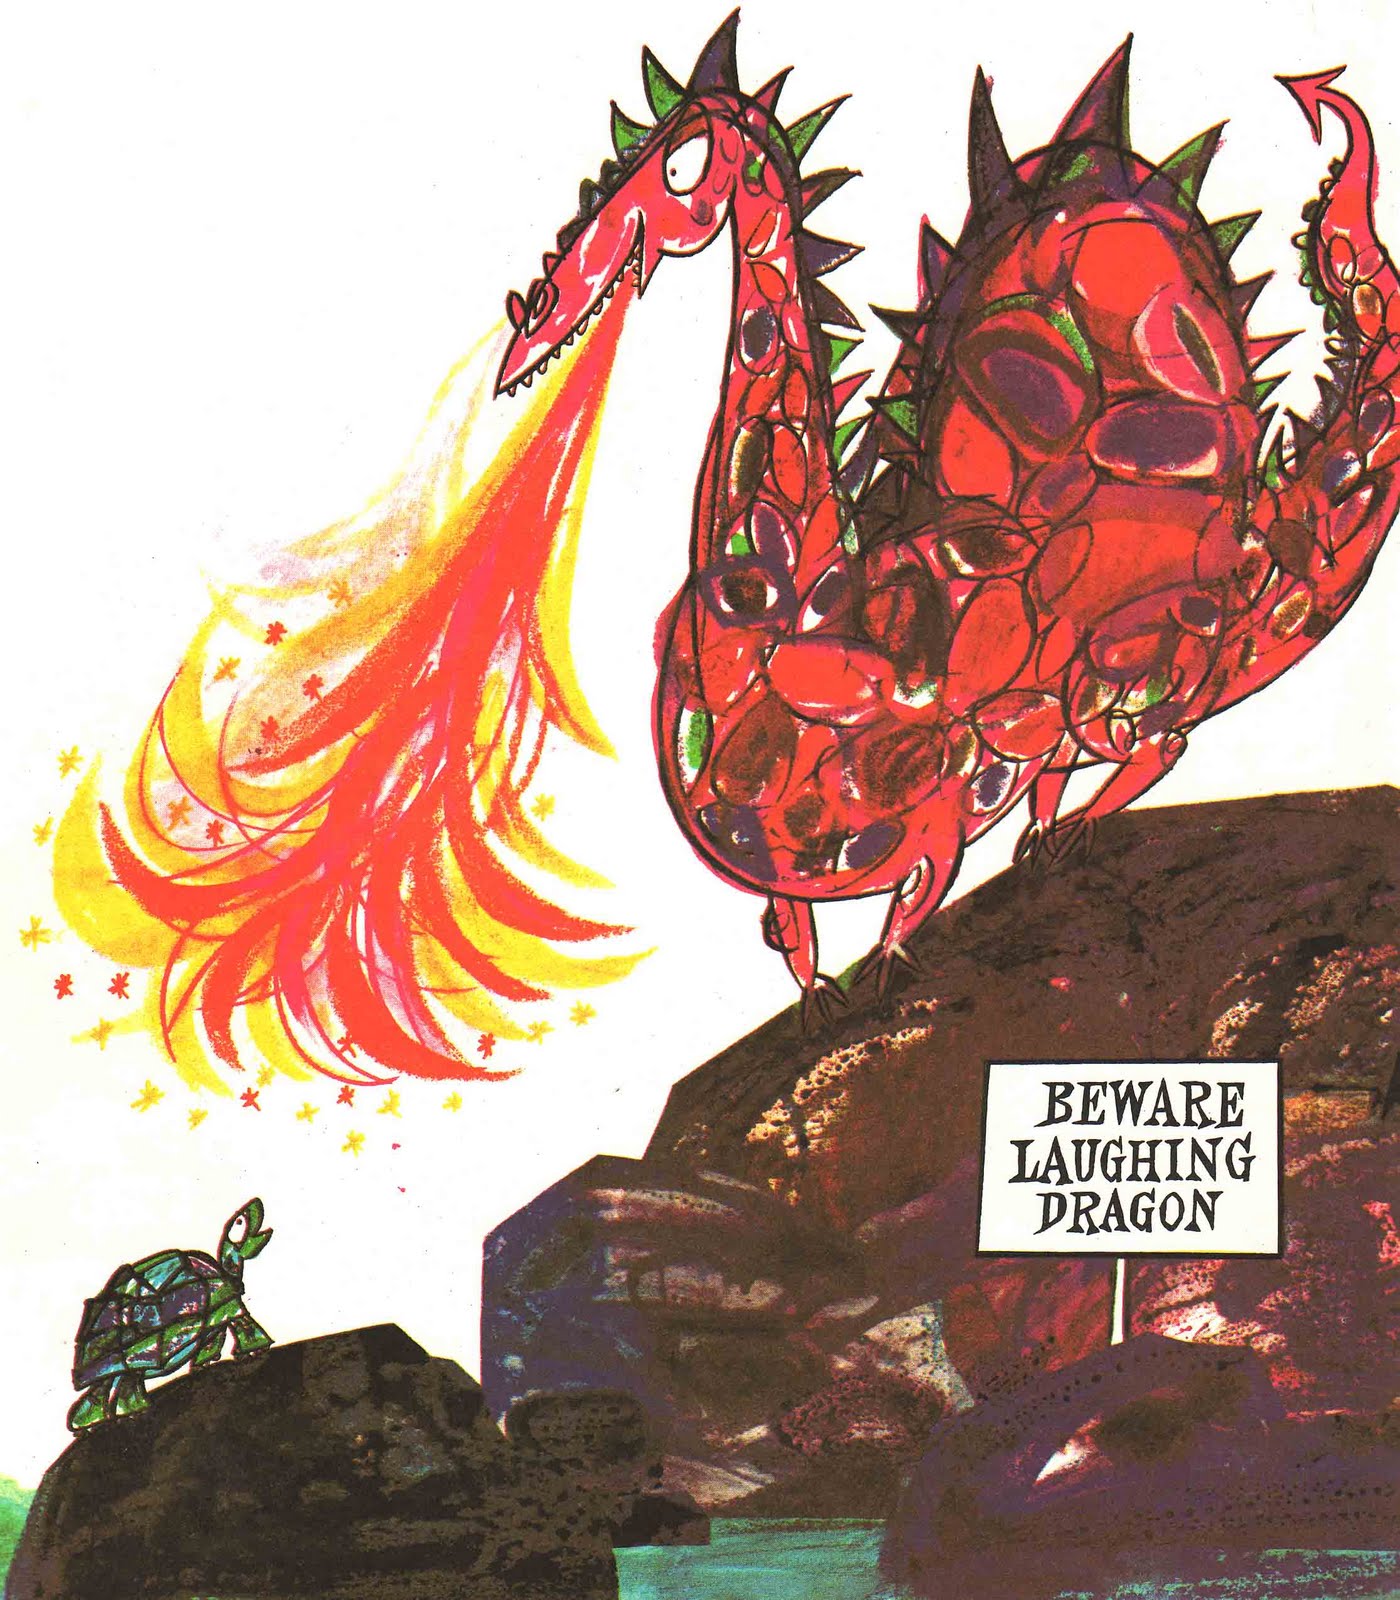 Vintage Kids' Books My Kid Loves: The Laughing Dragon